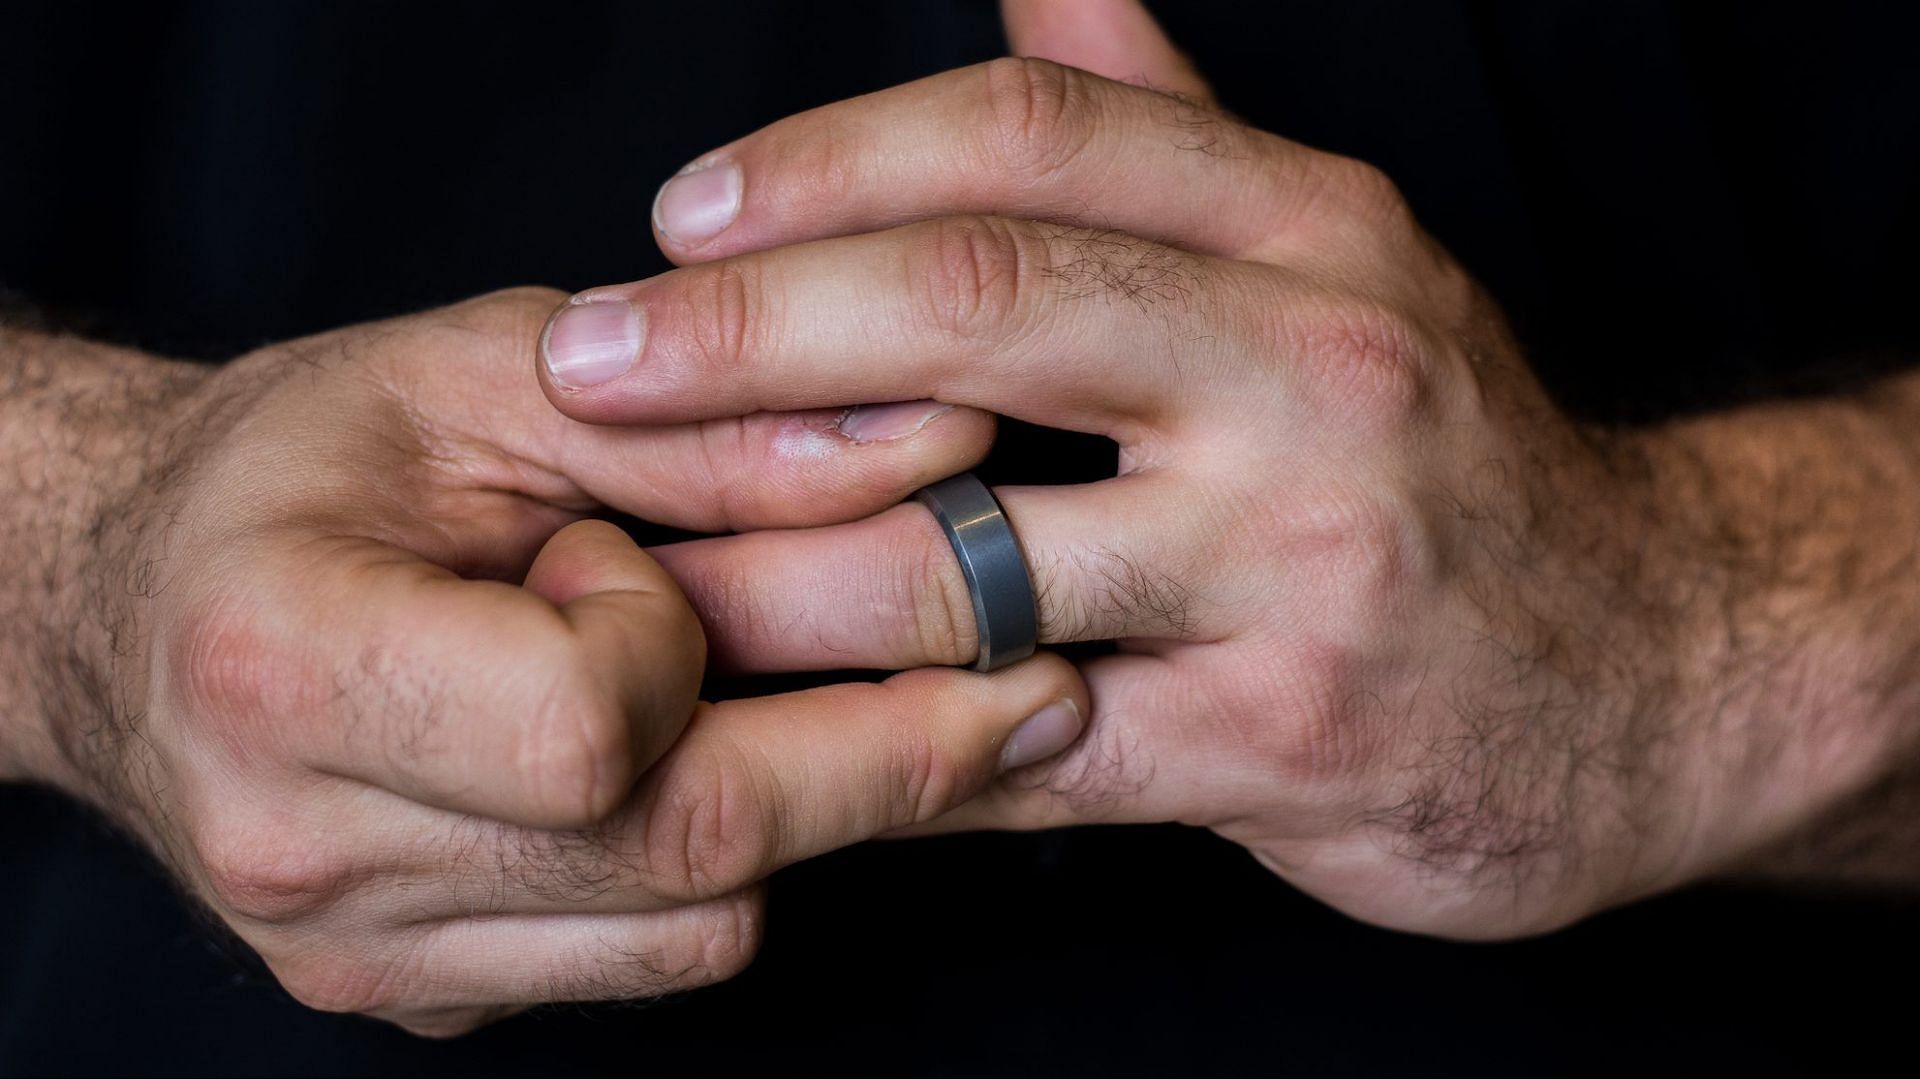 Fidgeting with fingers is a common symptom of anxiety. (Image via Gettyimages/ Getty)